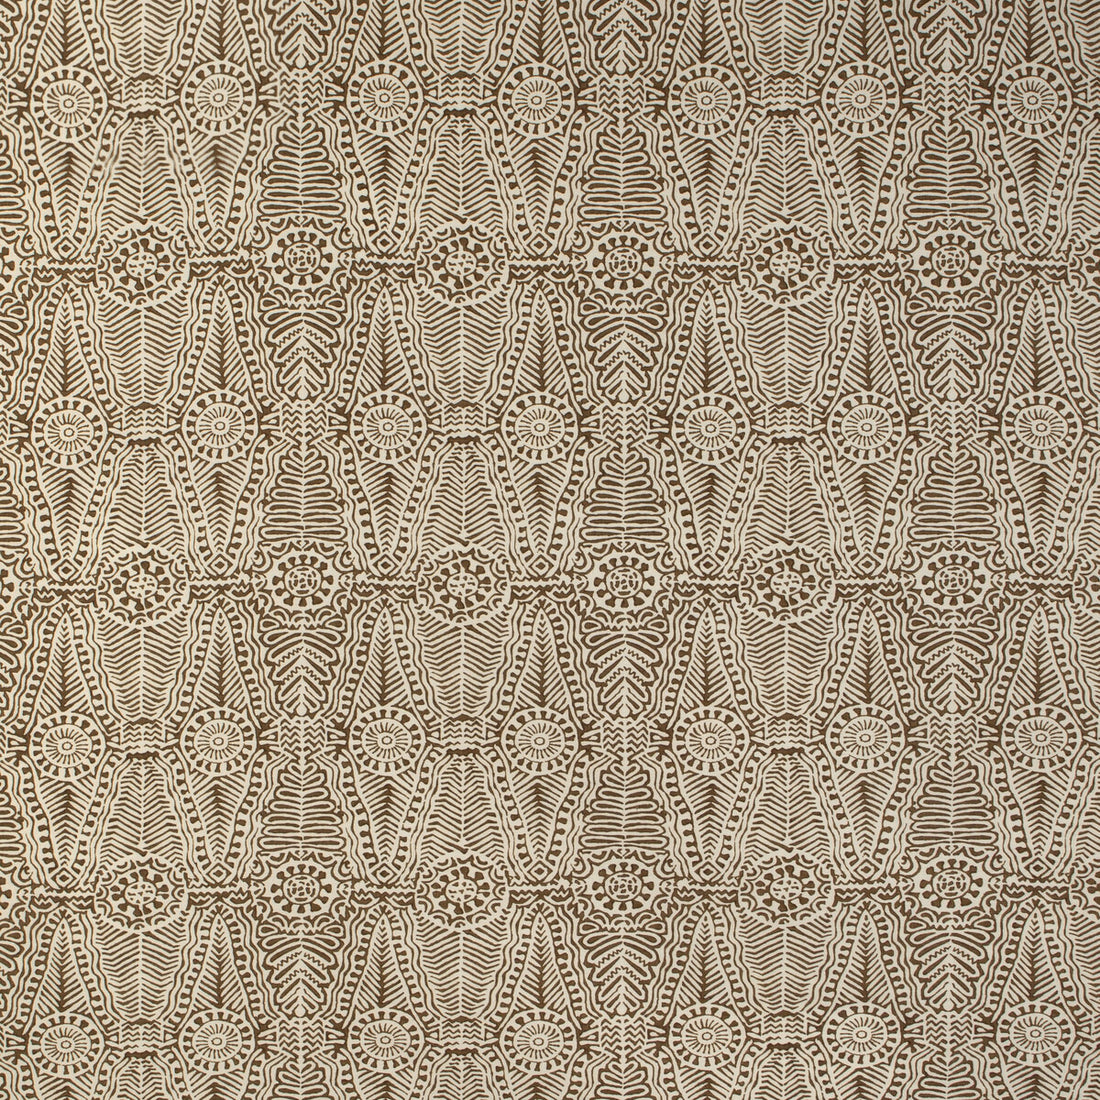 Drayton Print fabric in java color - pattern 2020184.6.0 - by Lee Jofa in the Clare Prints collection